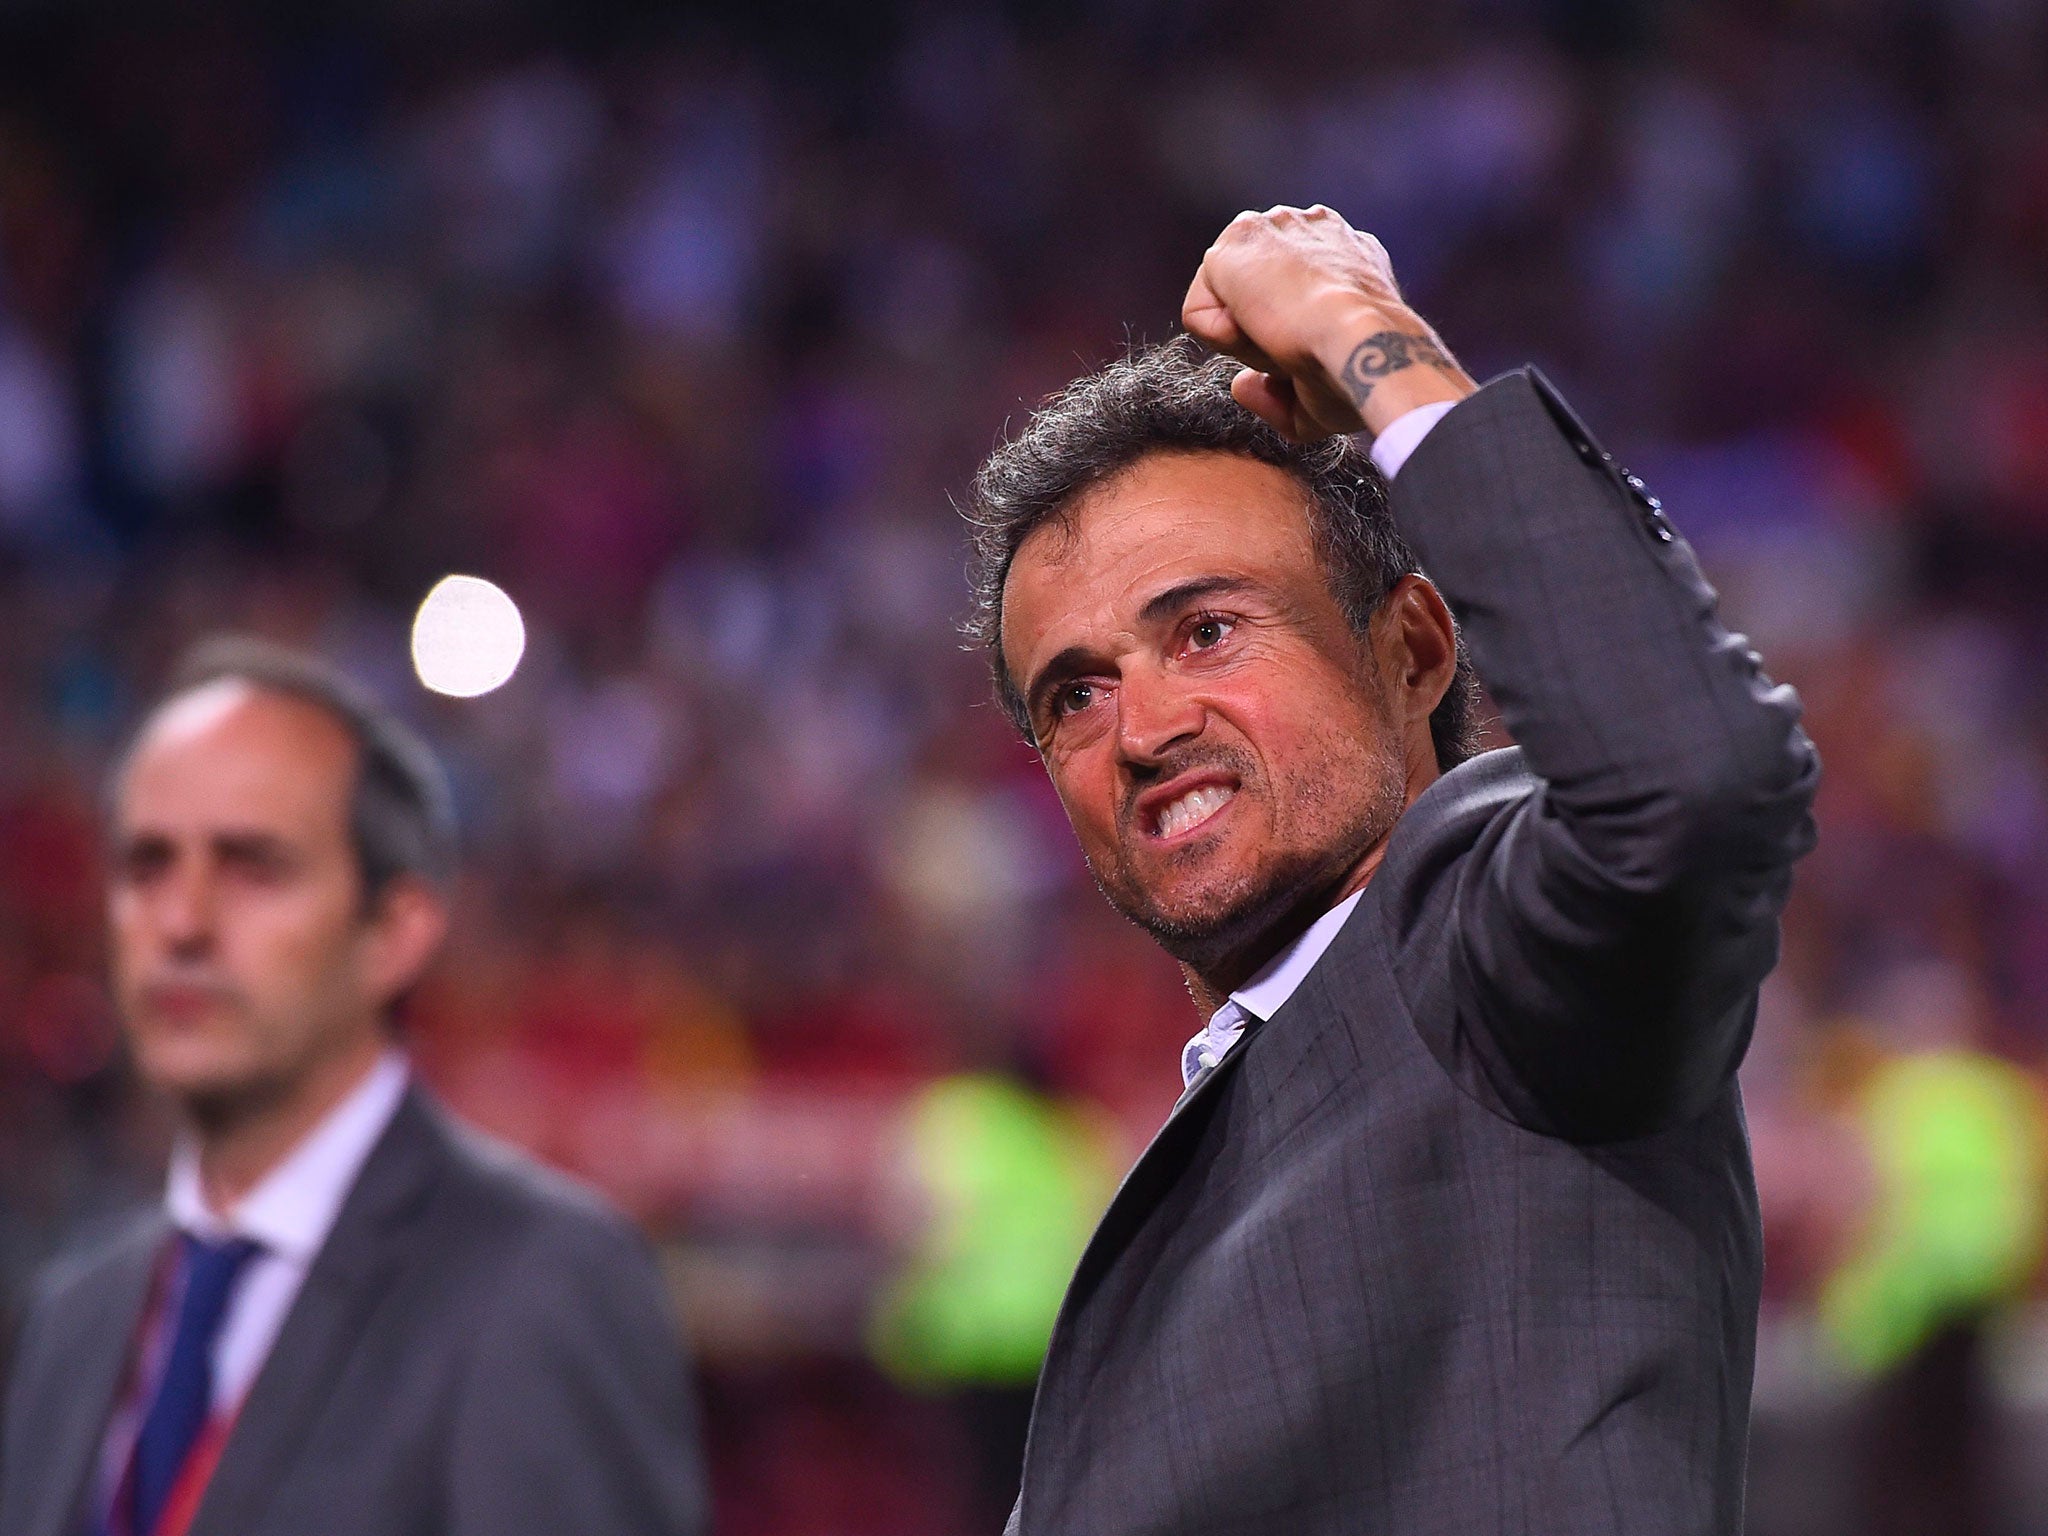 Luis Enrique celebrates after securing one final trophy with Barcelona